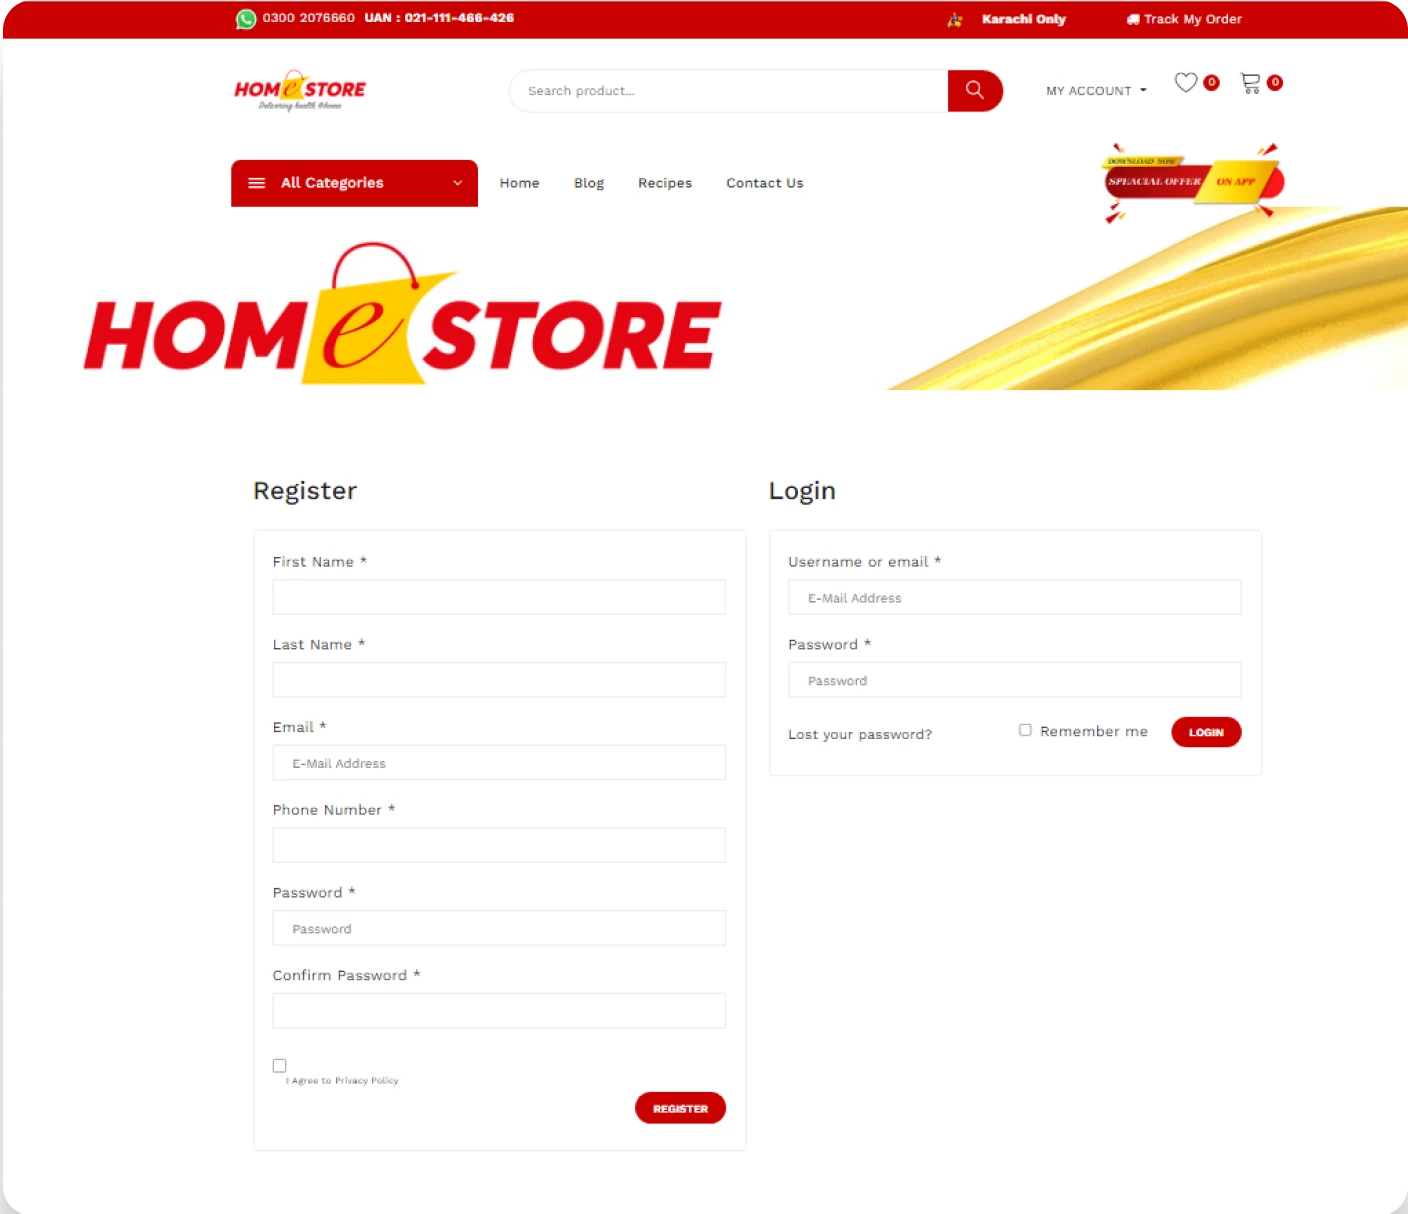 Home Store Registration and Login